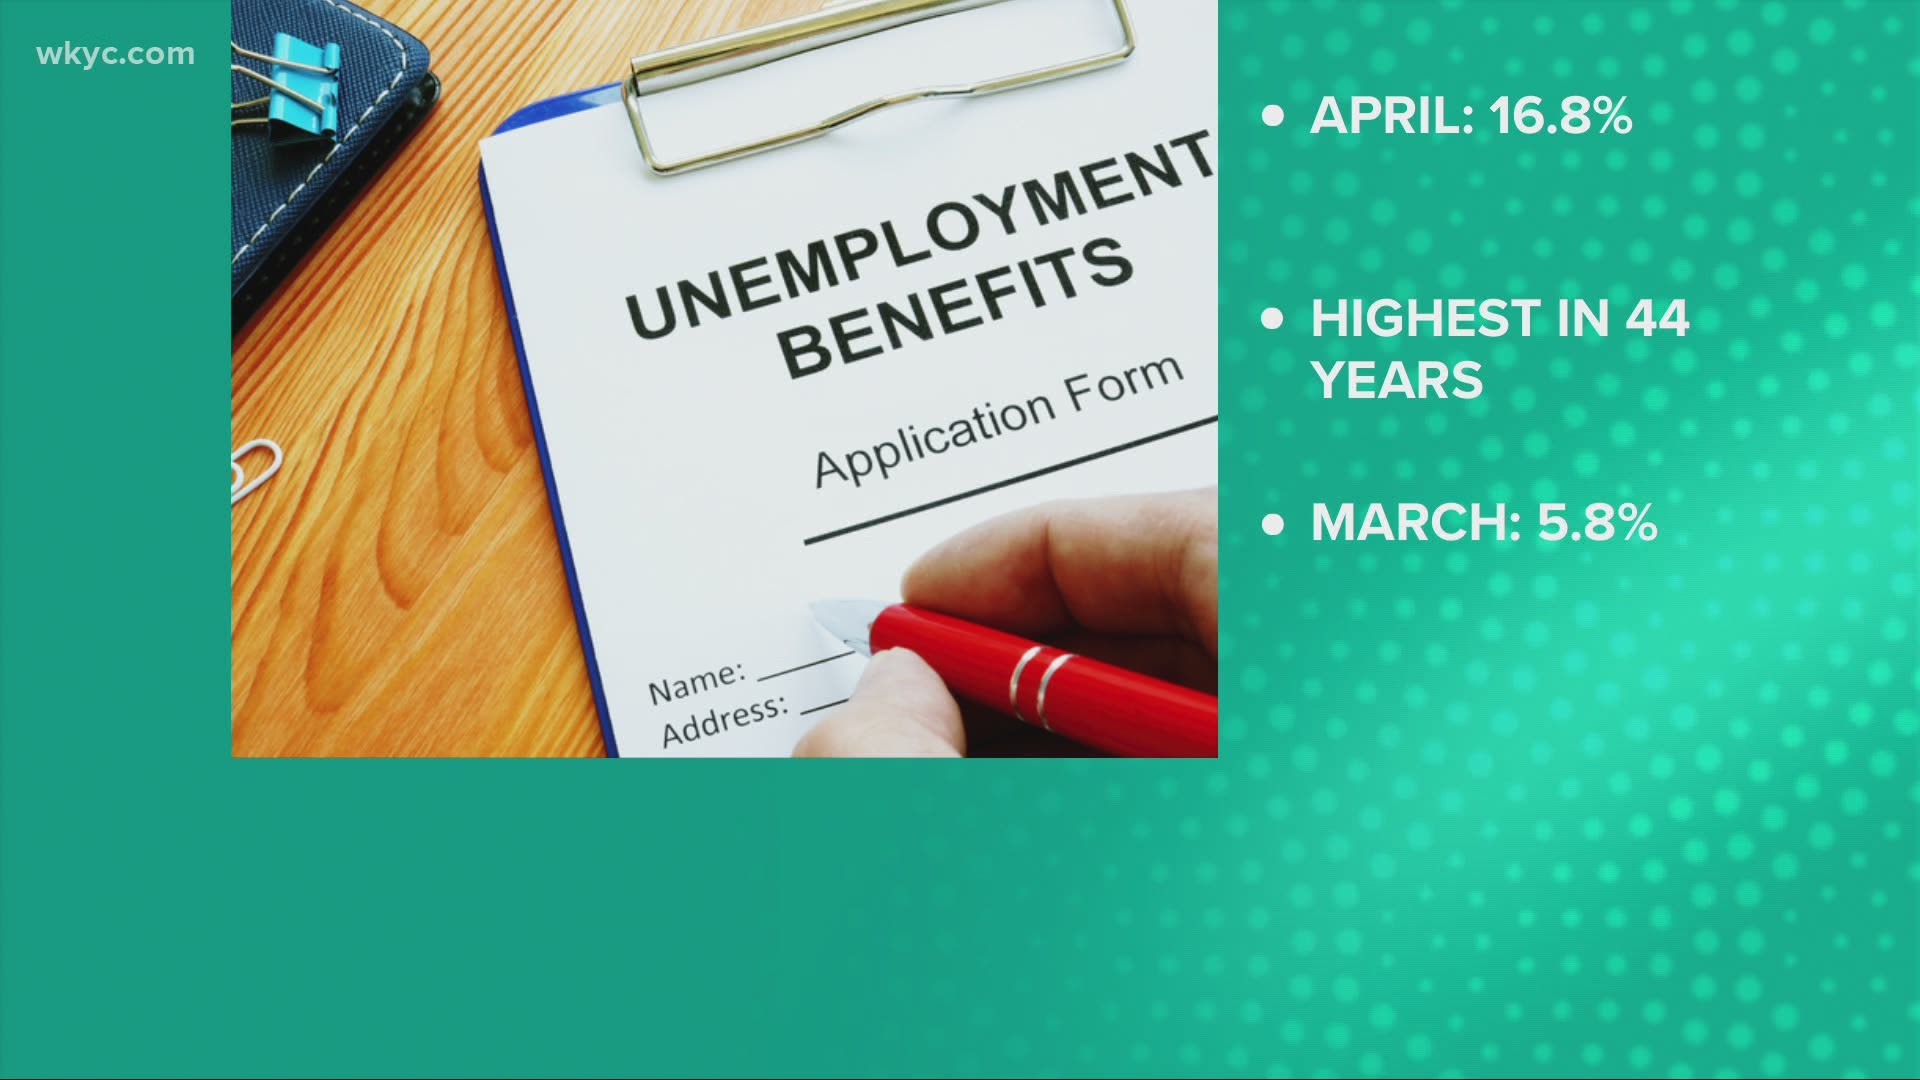 The 16.8% unemployment rate in April is up from 5.8% in March. The rate in Ohio is also more than the national rate, which was 14.7%.